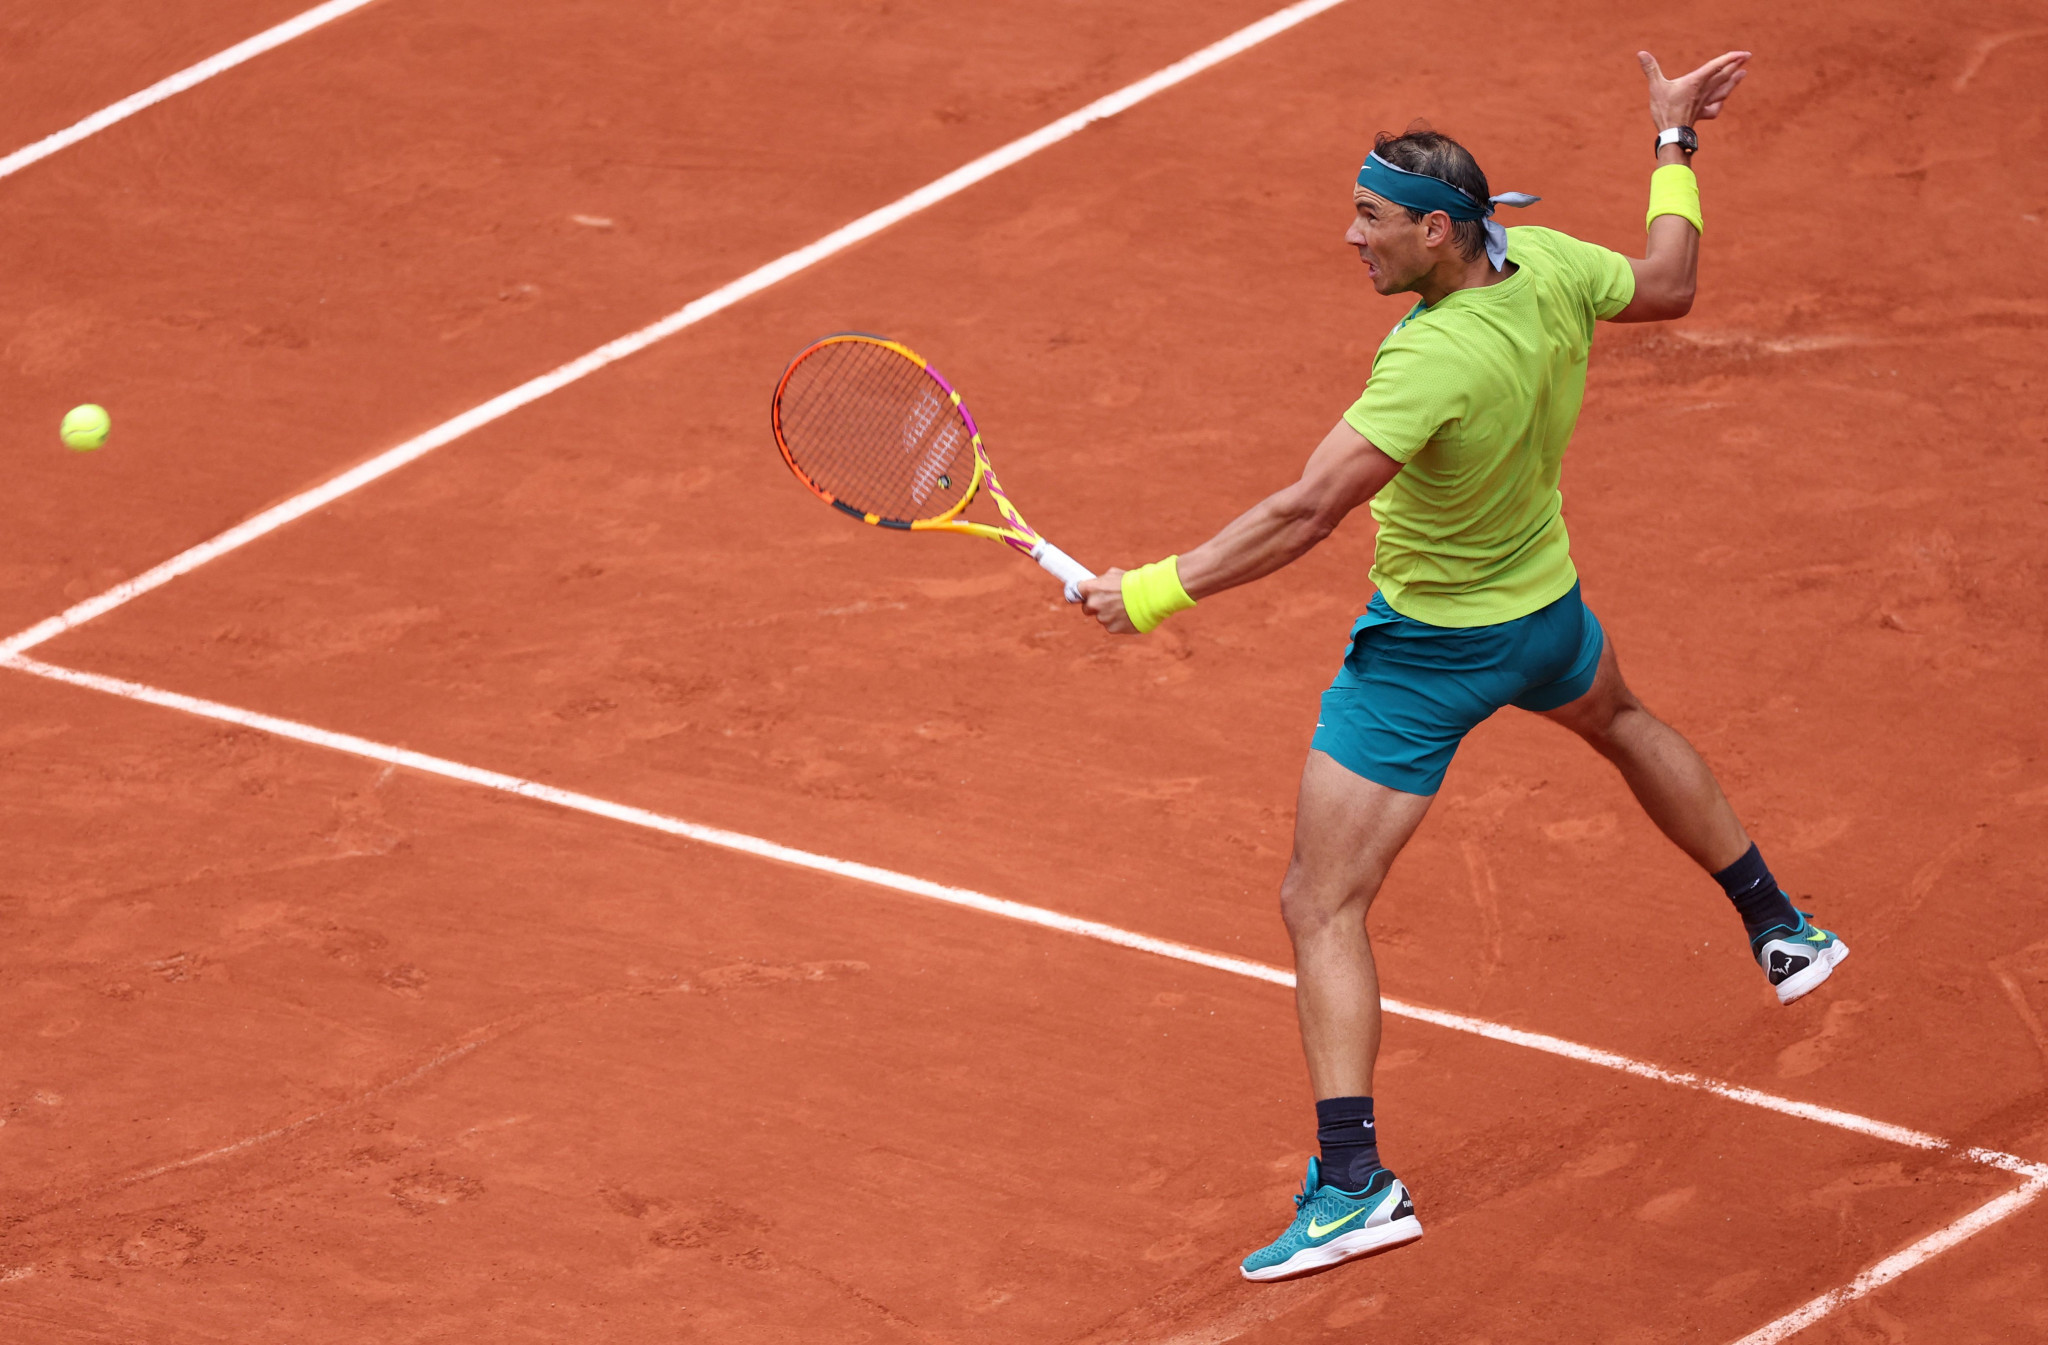 Rafael Nadal cruised to a 6-2, 6-2, 6-2 win over Australian Jordan Thompson in the first round of the French Open ©Getty Images